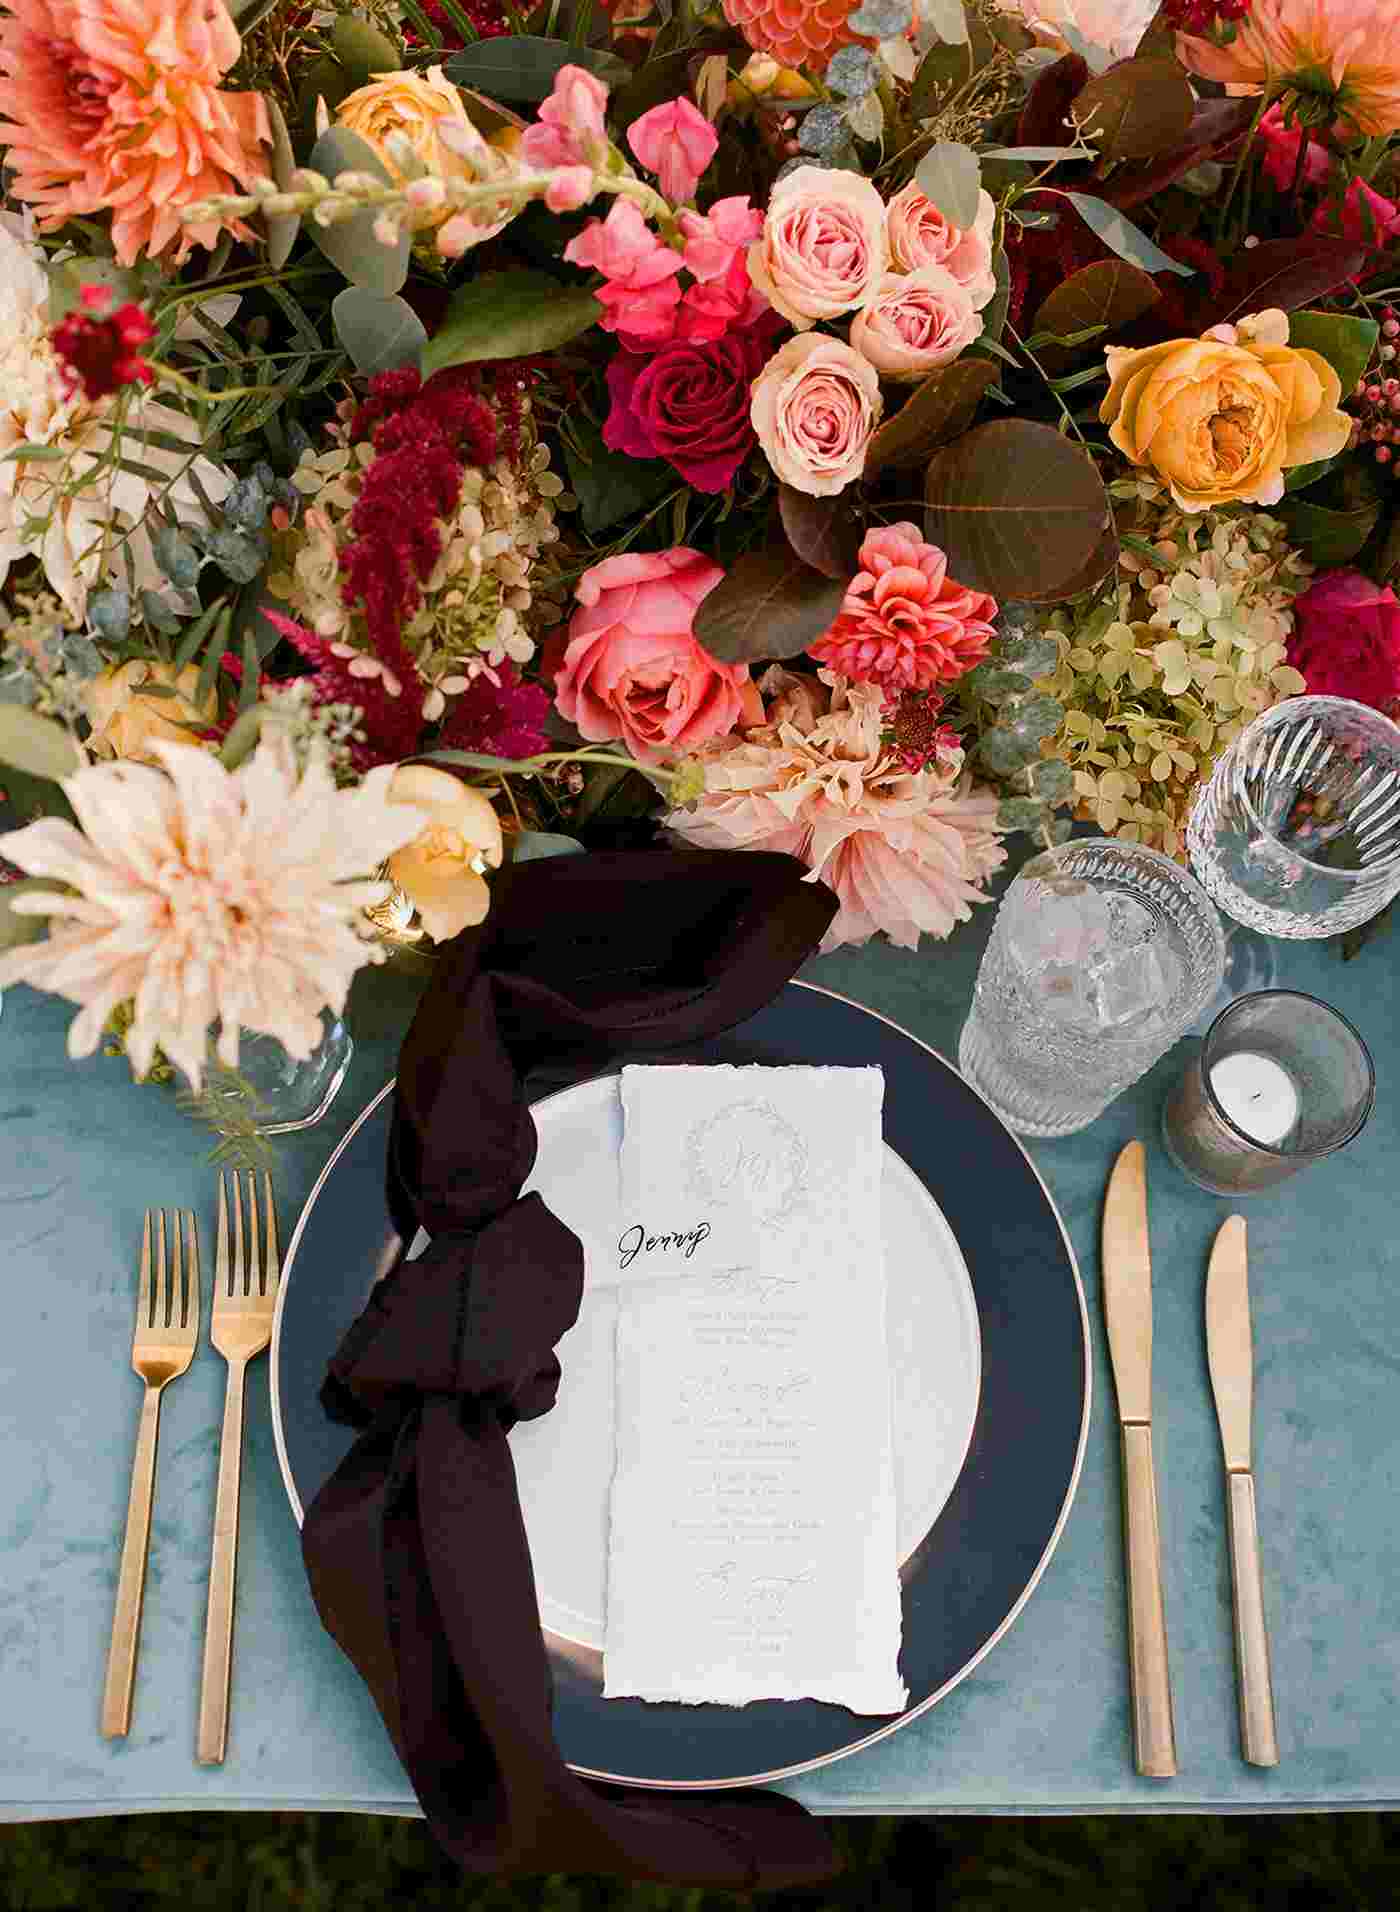 Autumn table decoration with roses and dahlias and autumn leaves and ornamental grasses